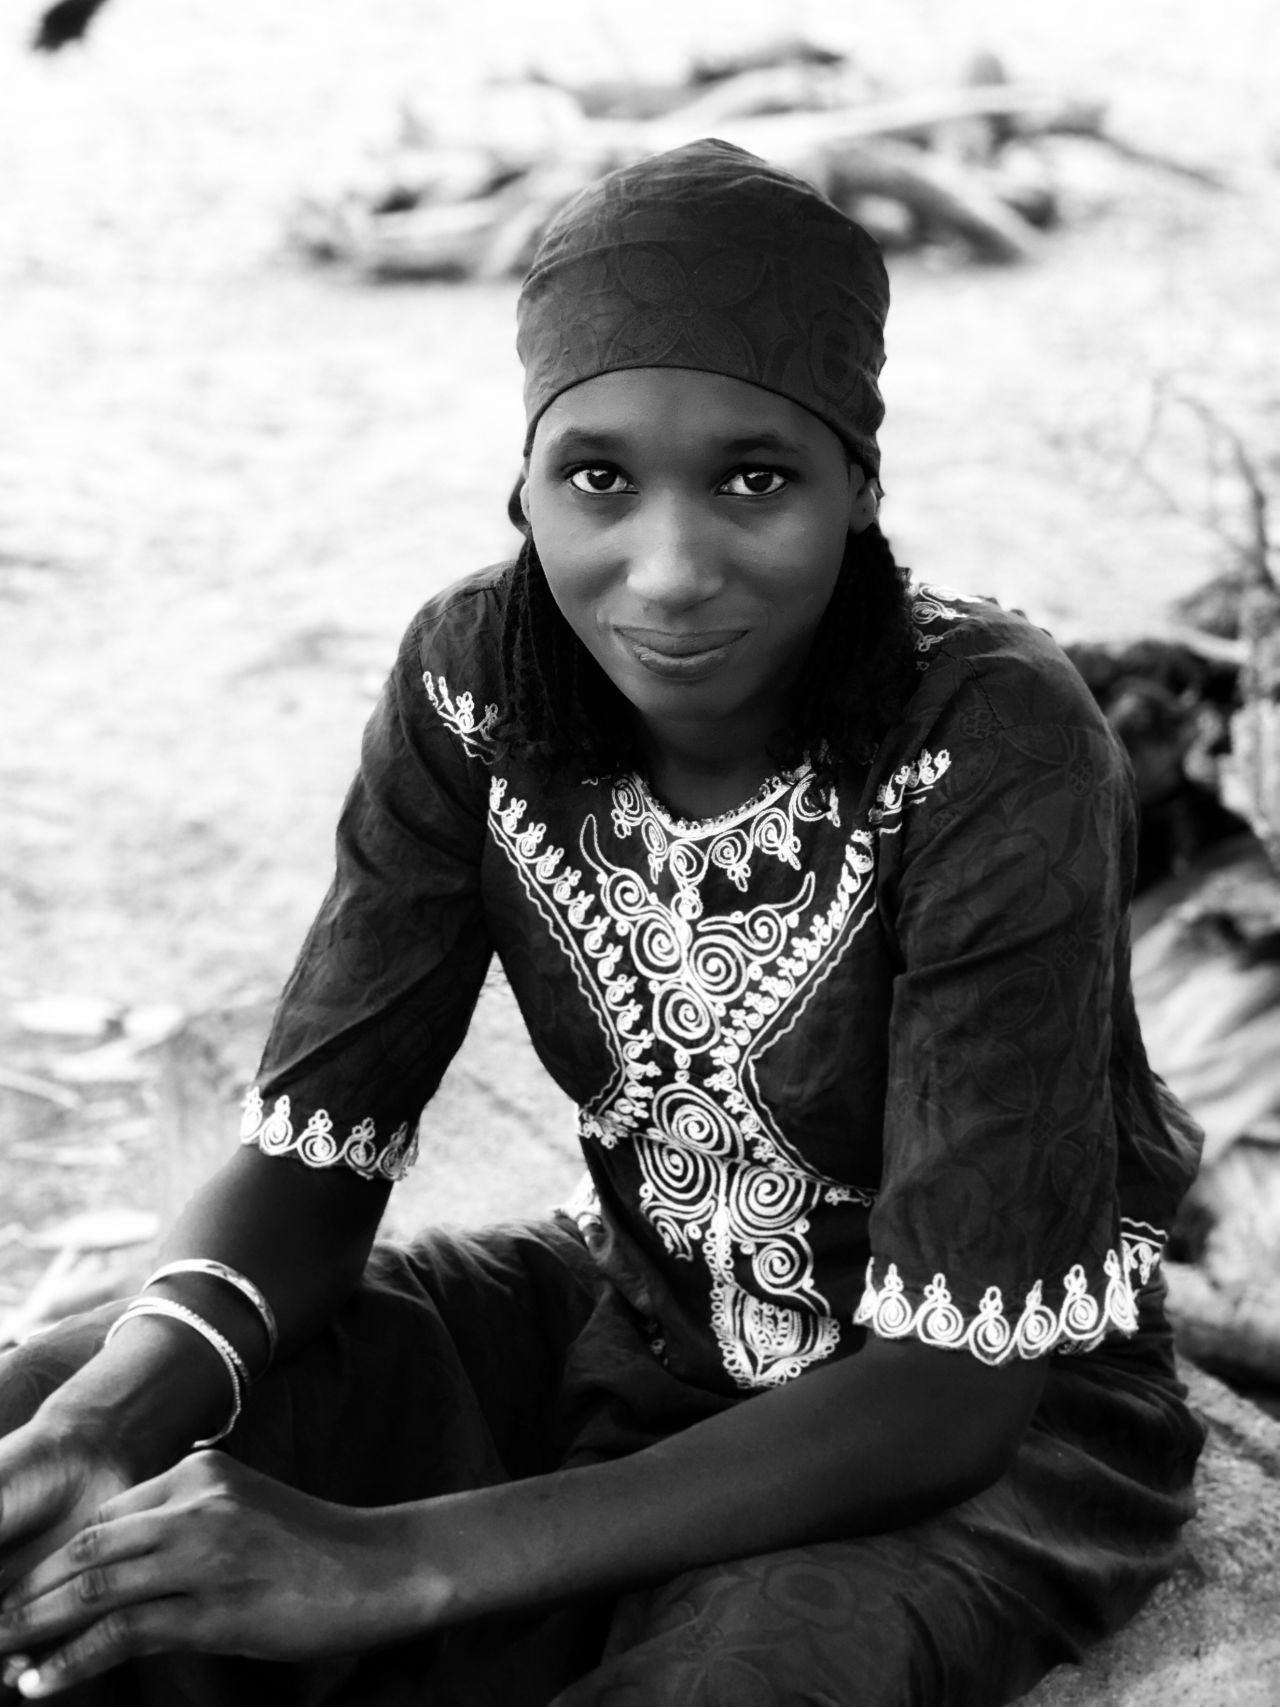 Amina is photographed by <a href="http://chinwe.me/" target="_blank" target="_blank">Chin We</a> at Ibiye, Kaduna State in Northern Nigeria.